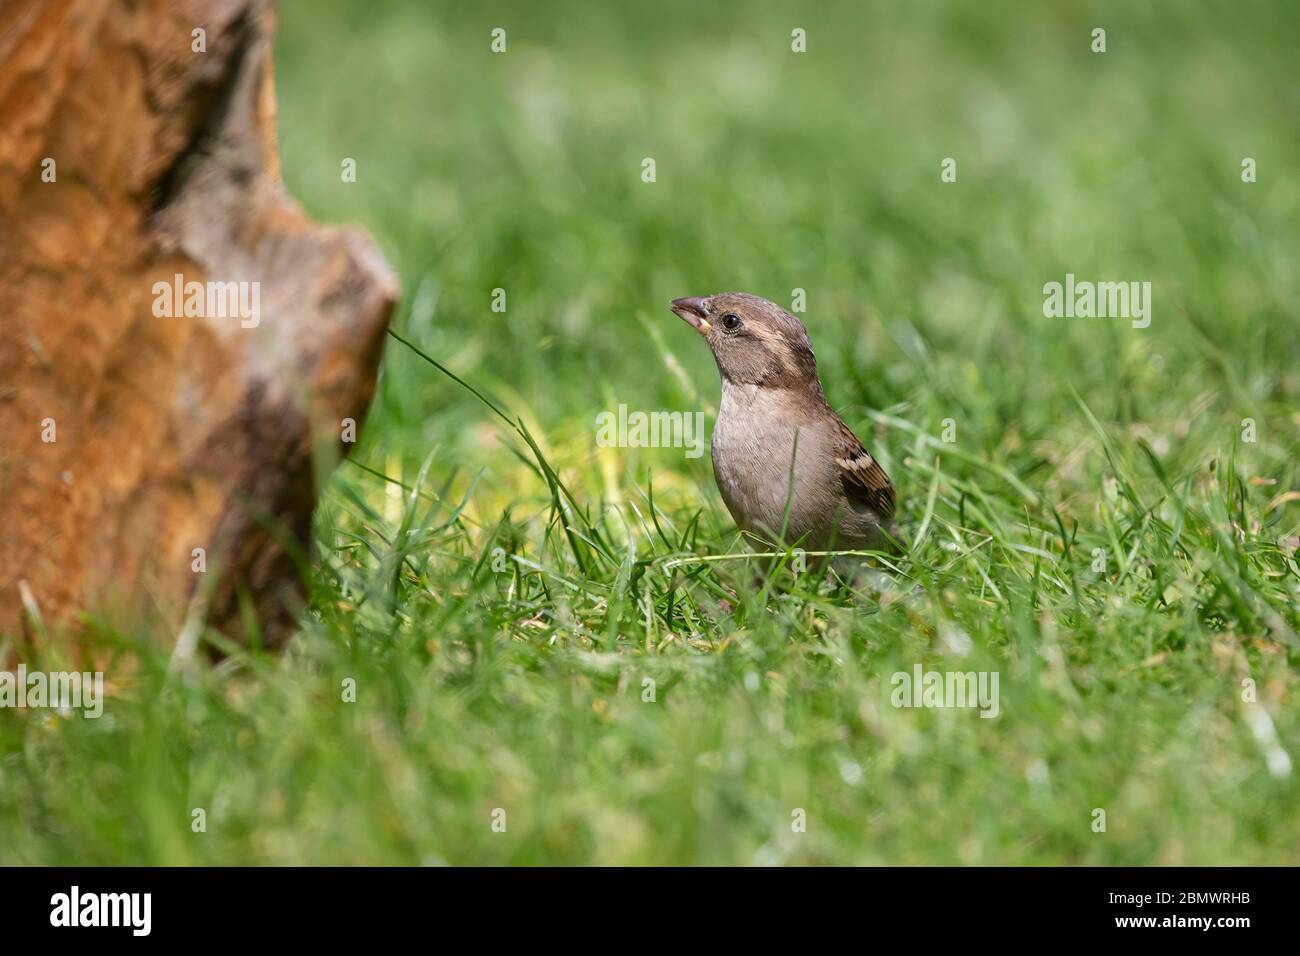 Female House Sparrow Passer domesticus at eye level on a garden lawn adjacent to an old oak log looking for food. Stock Photo